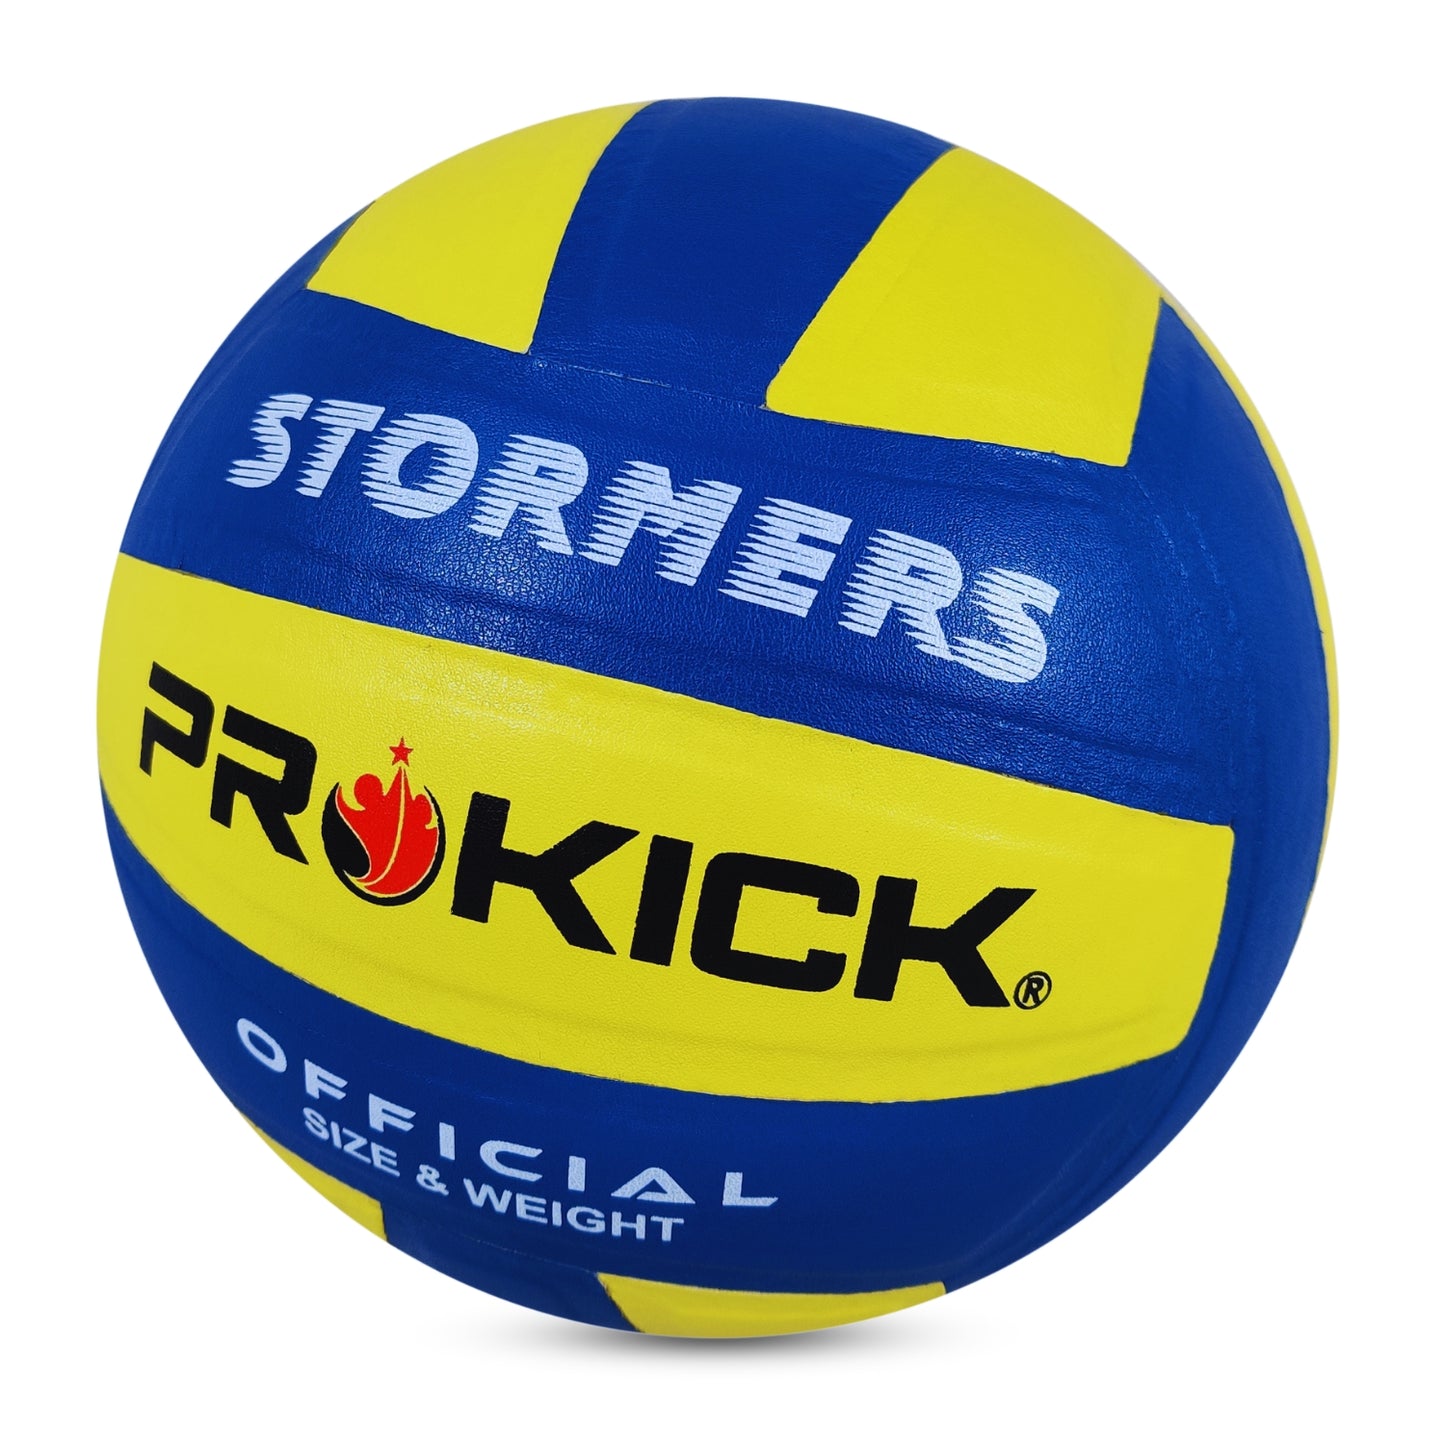 Prokick Stormers PU Pasted 18 Panels Volleyball, Blue/Yellow (Size 4) - Best Price online Prokicksports.com